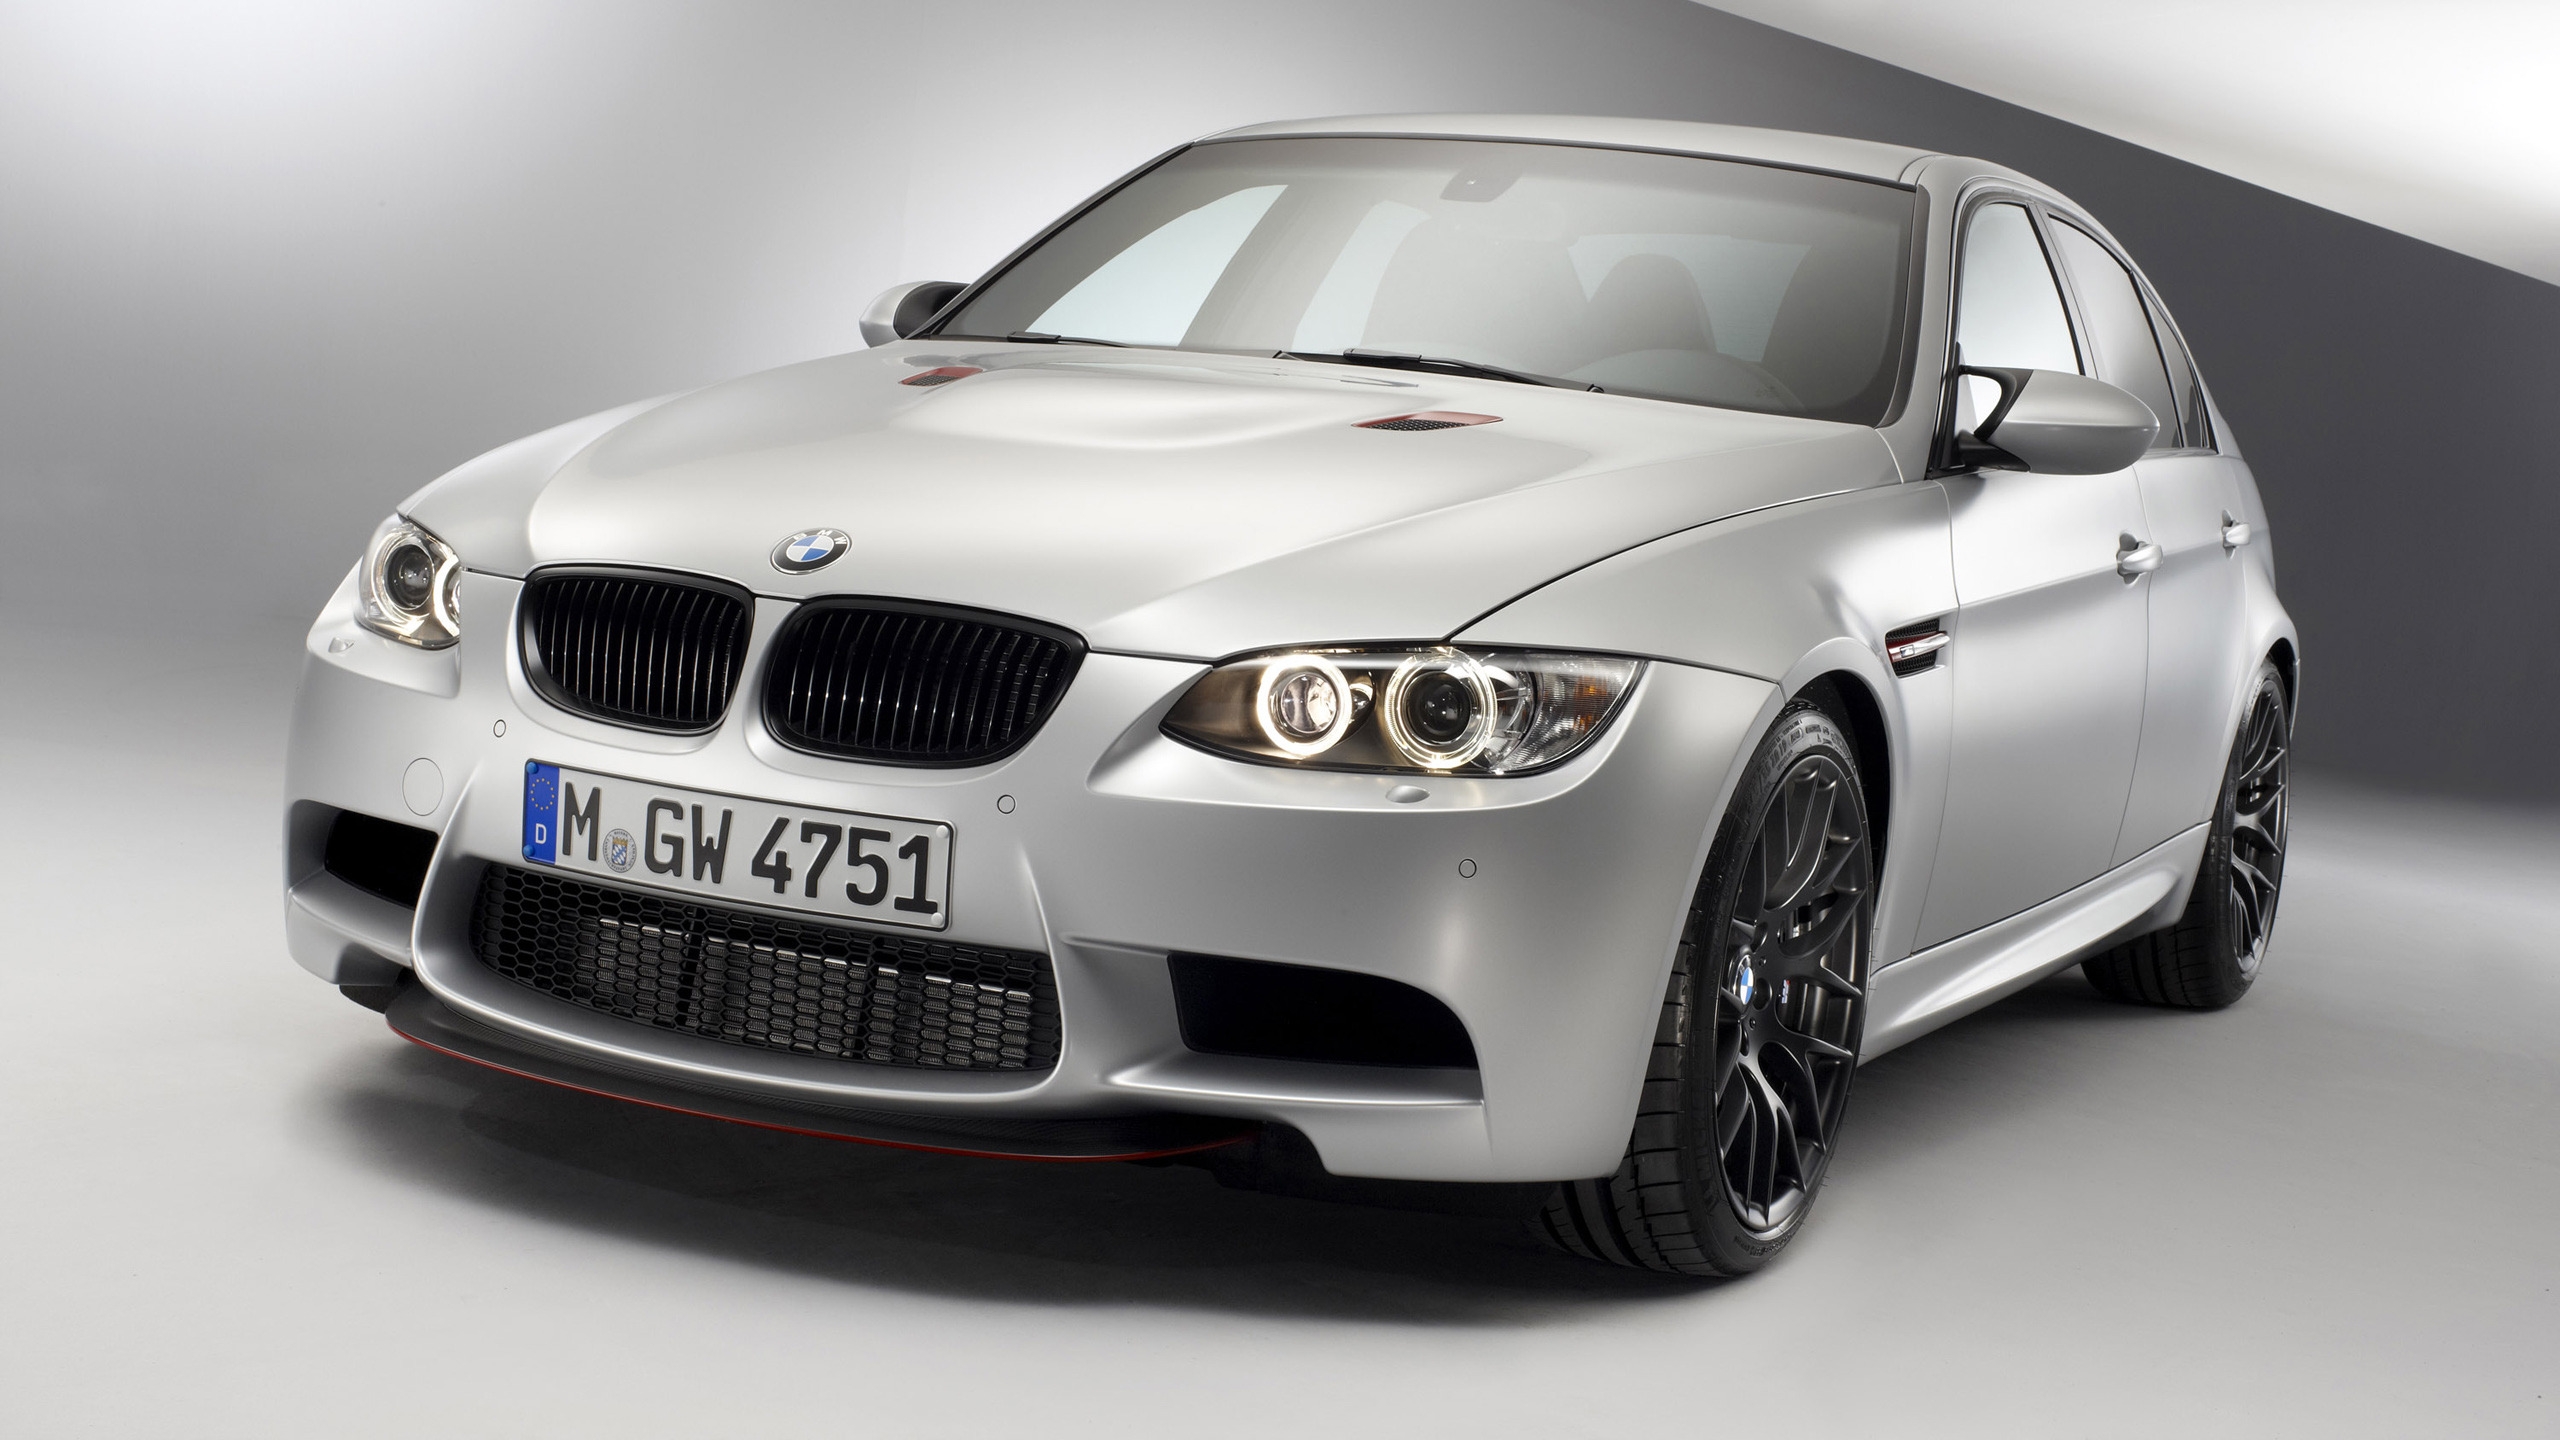 BMW M3 E90 CRT Front for 2560x1440 HDTV resolution